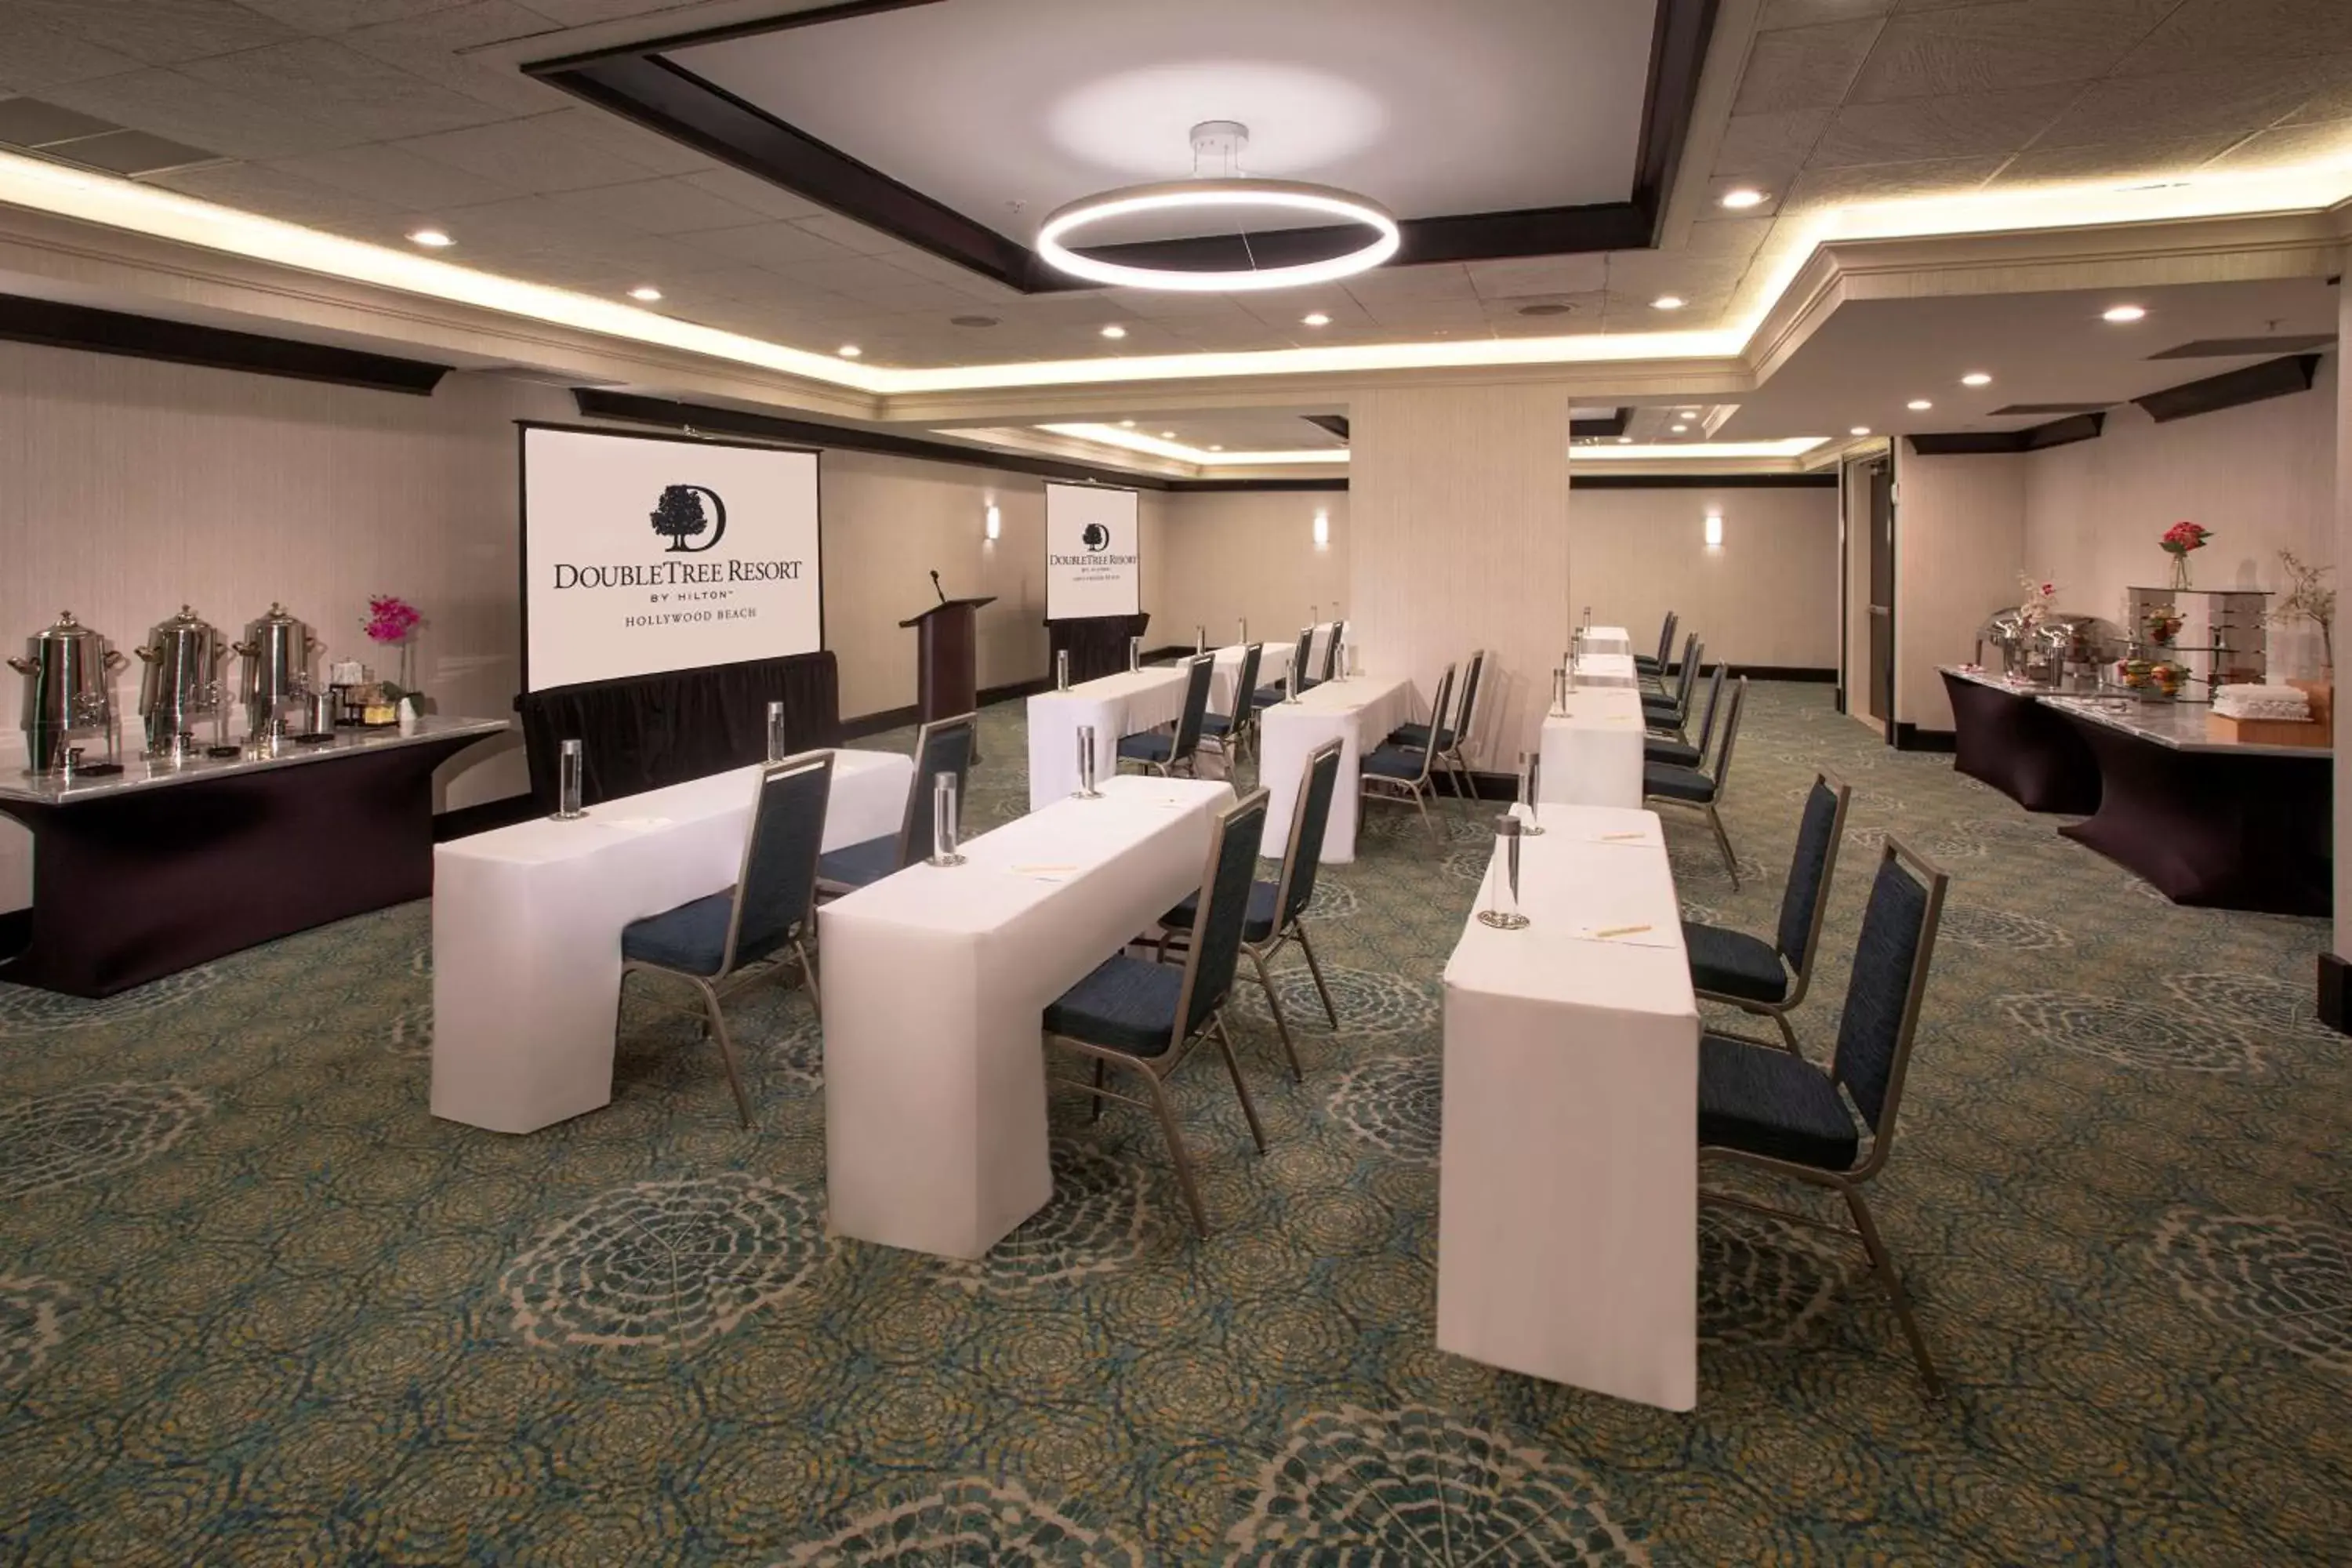 Meeting/conference room in DoubleTree Resort Hollywood Beach